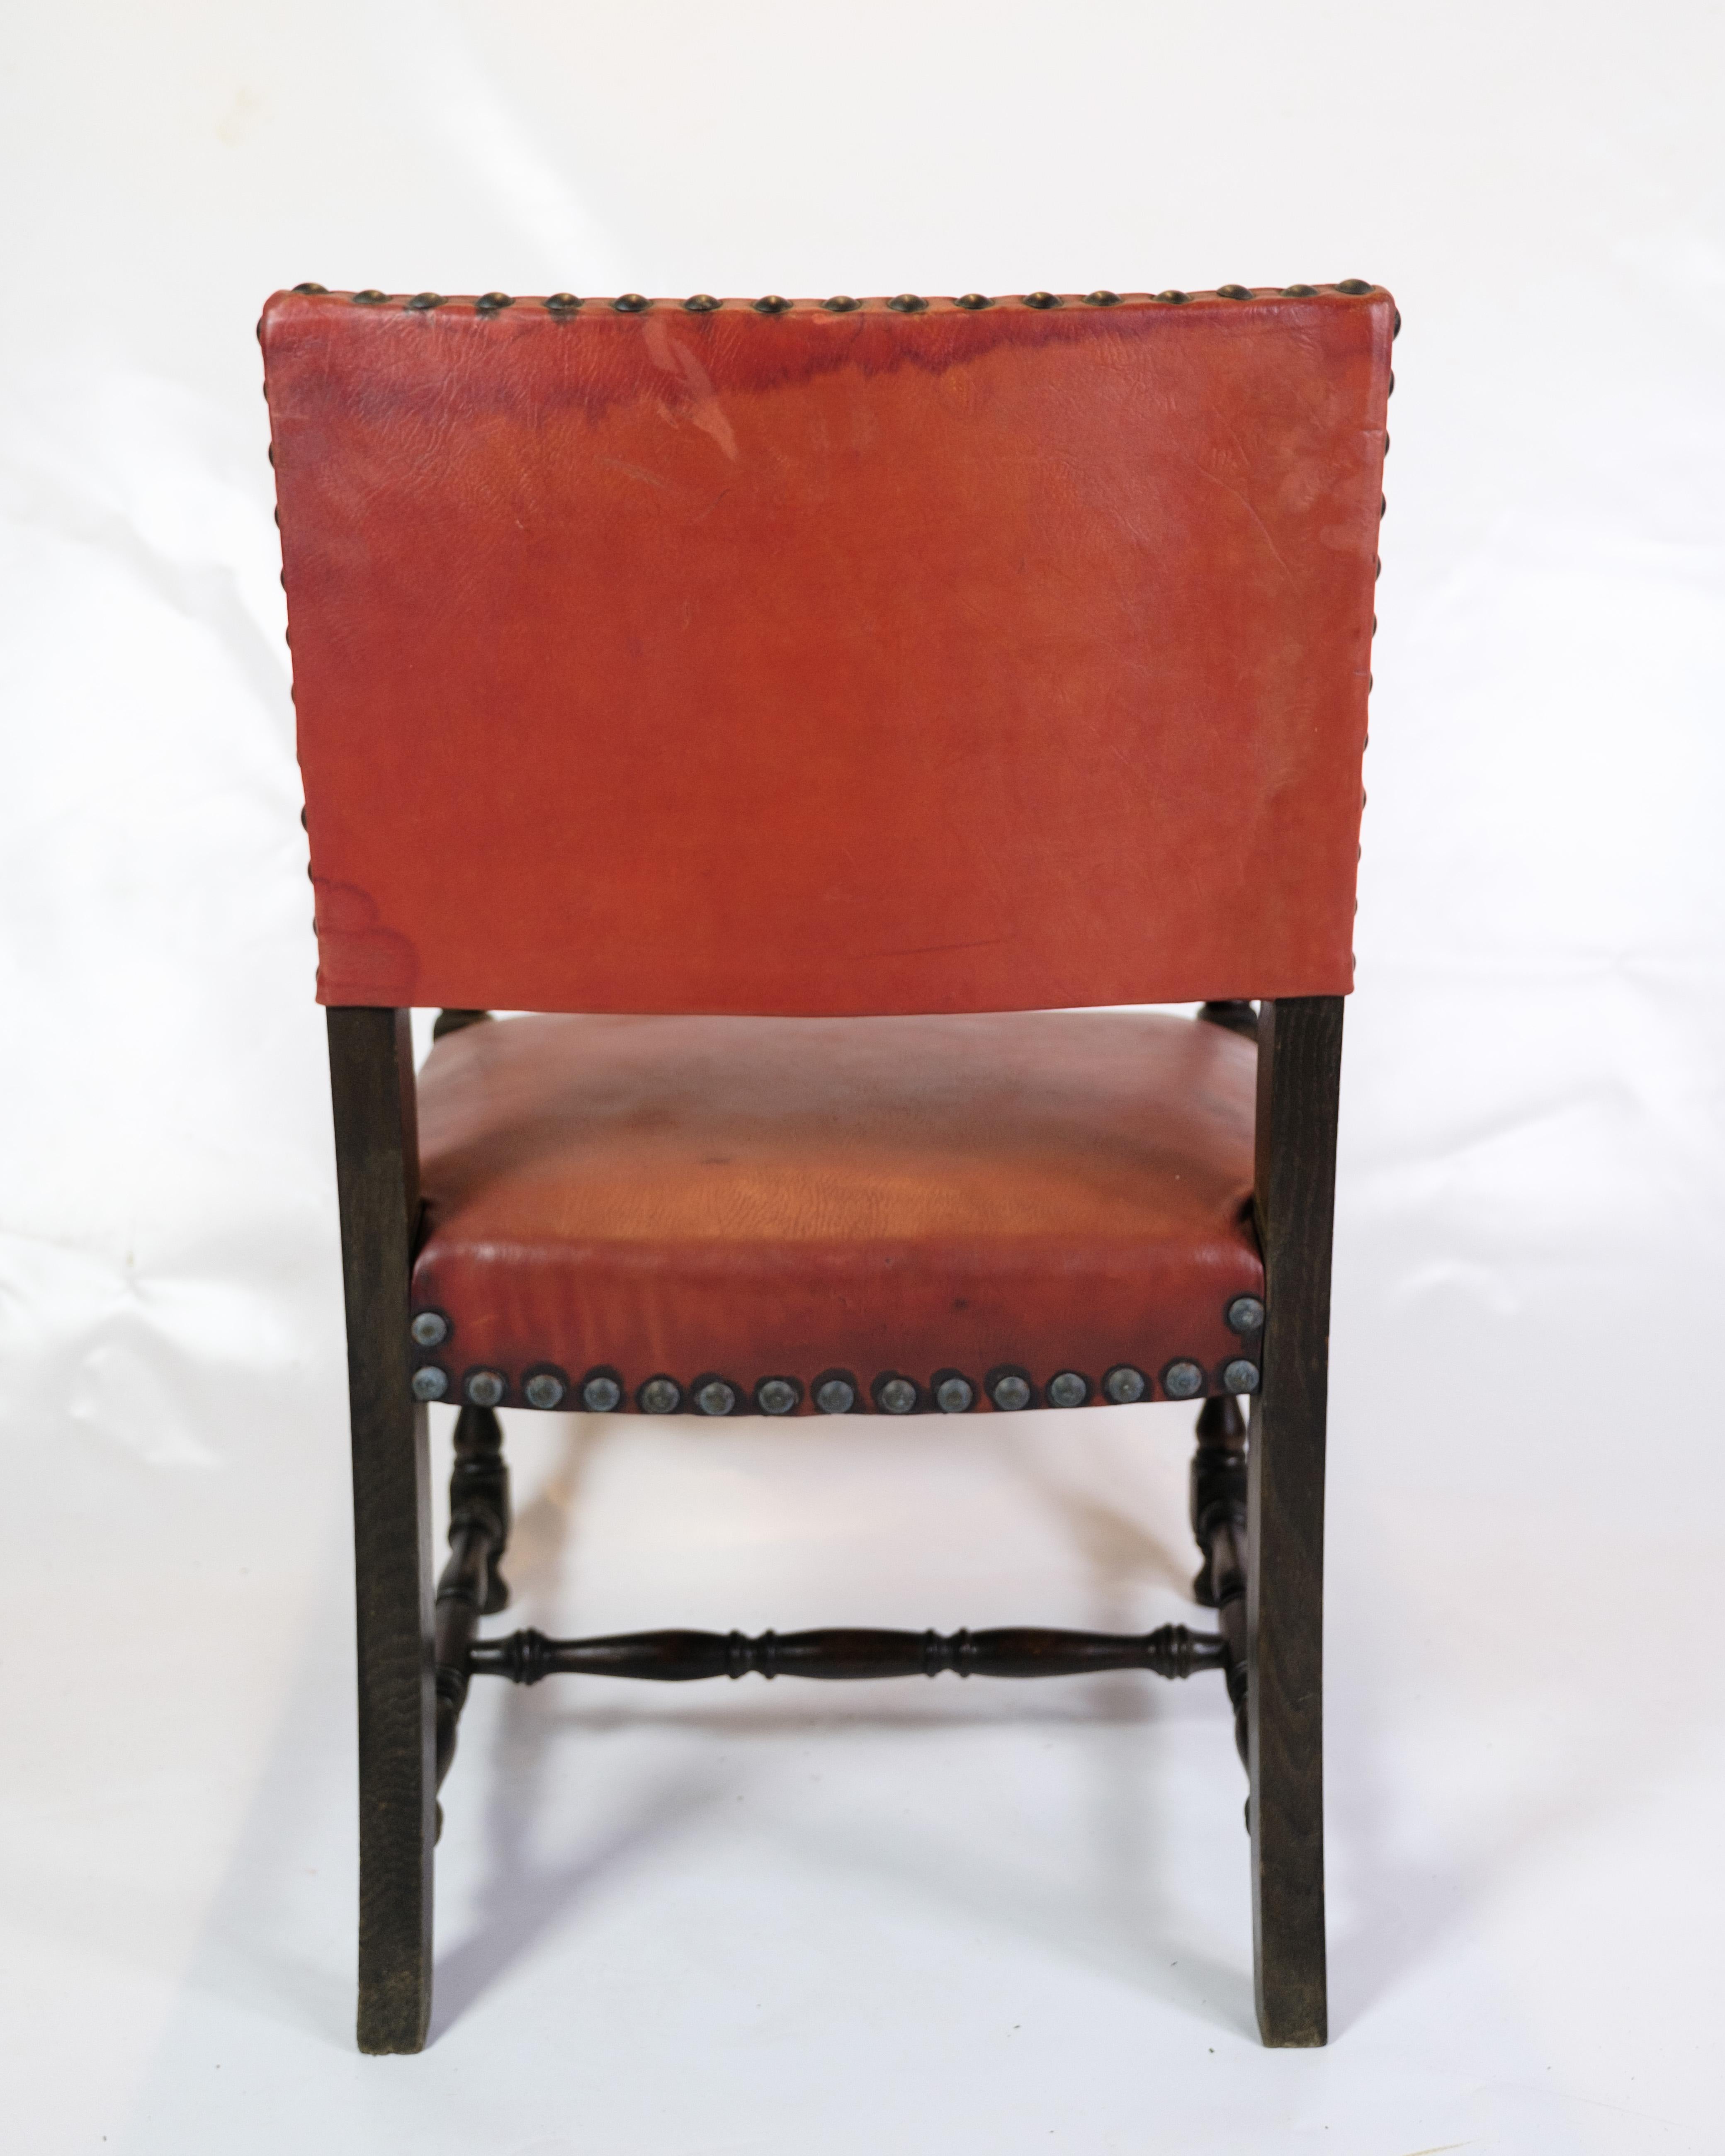 Scandinavian Modern Set Of 2 Antique Armchairs Made In Oak & With Red Leather From 1930s For Sale